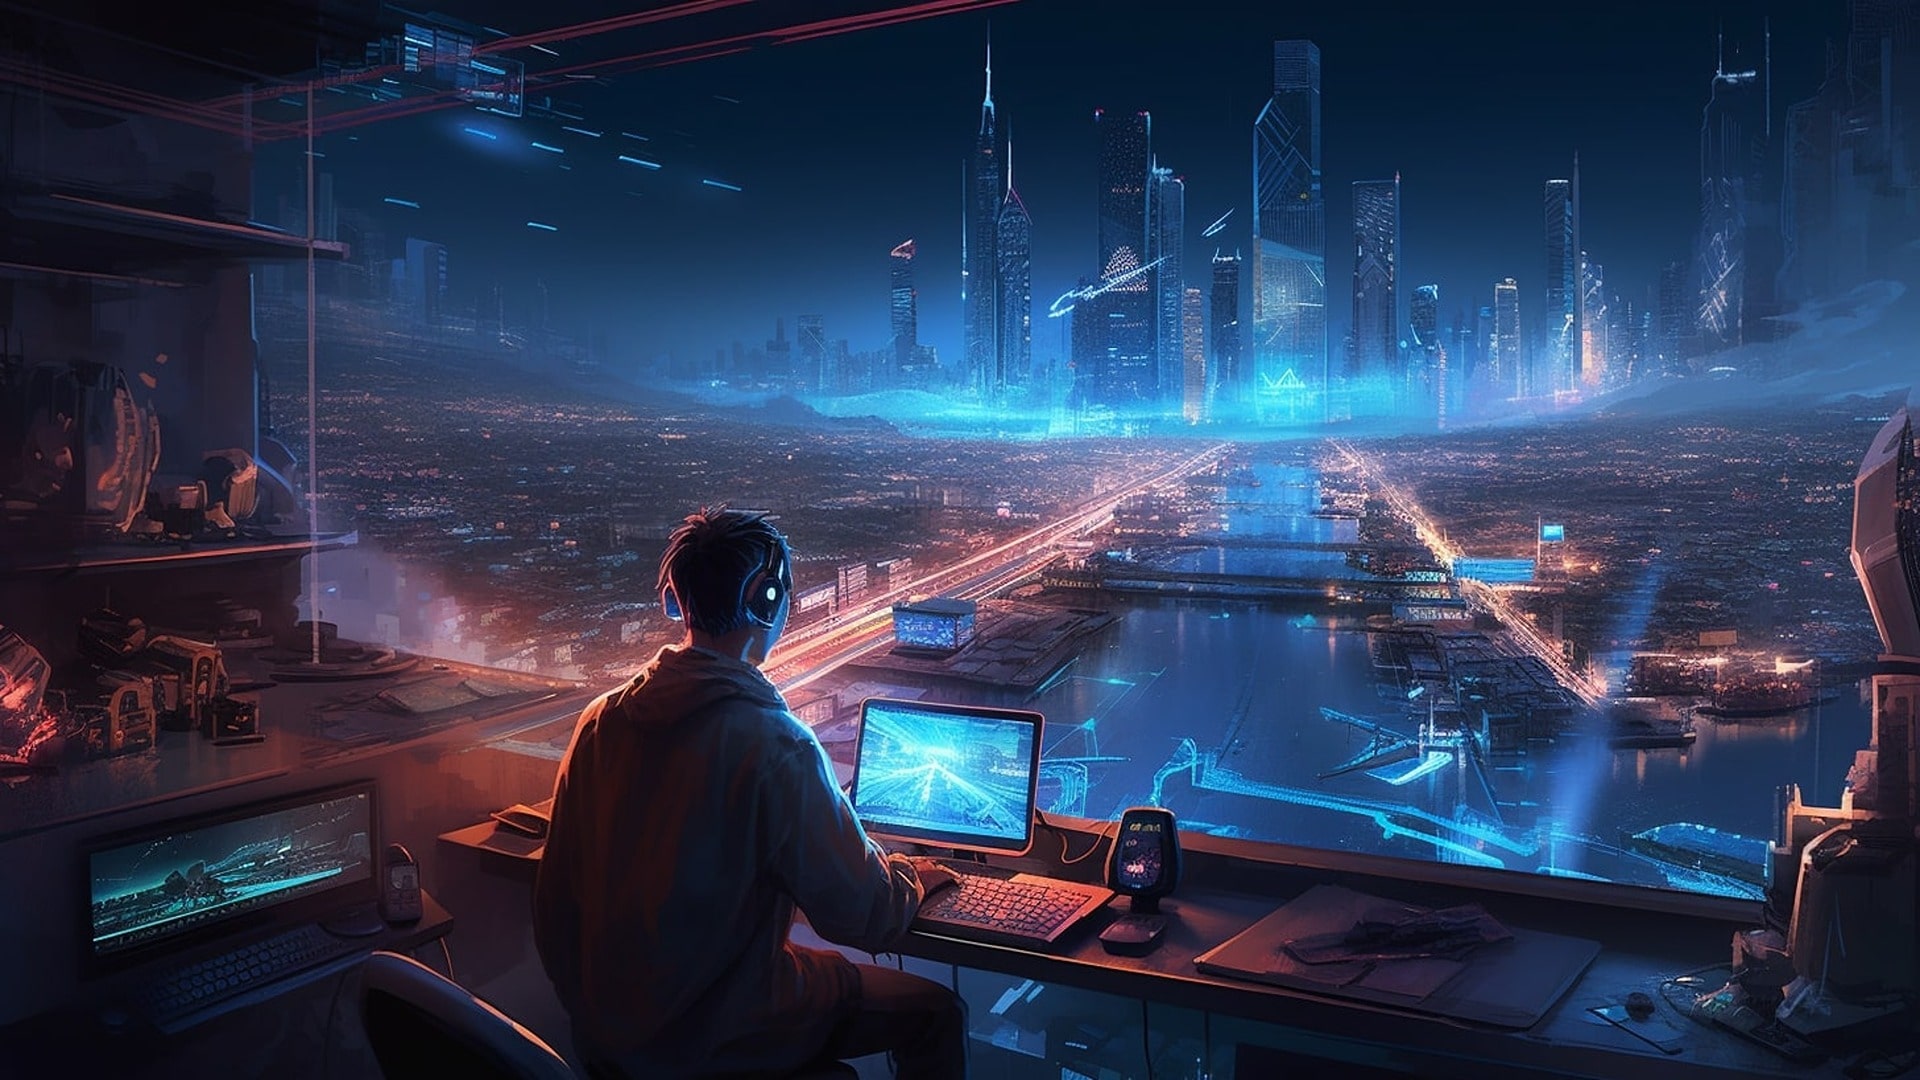 Gamer on a laptop linked to cloud gaming set against a backdrop of futuristic tech imagery.